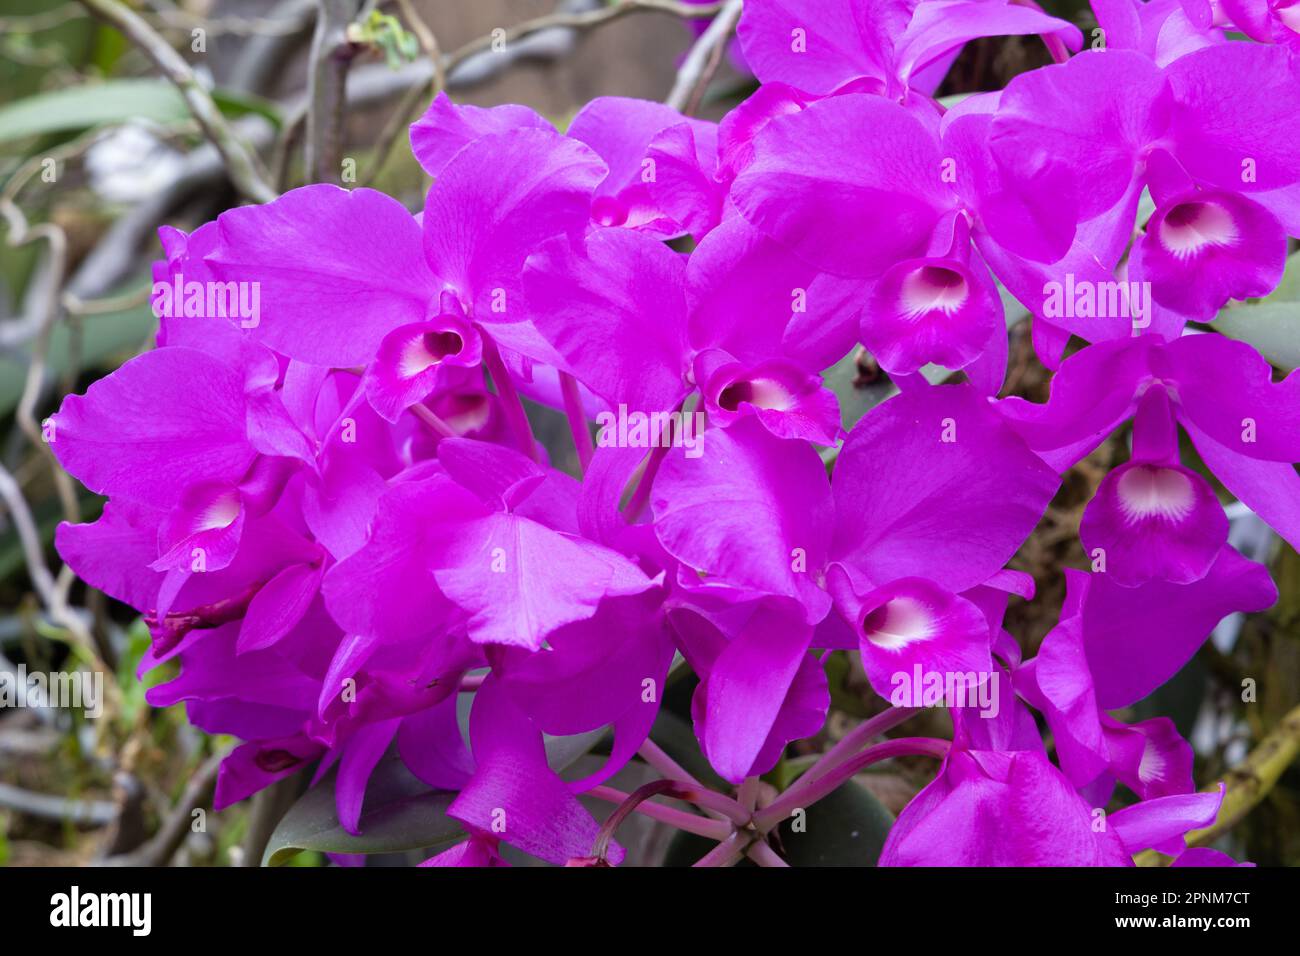 Pink cattleya orchid blossoms Stock Photo